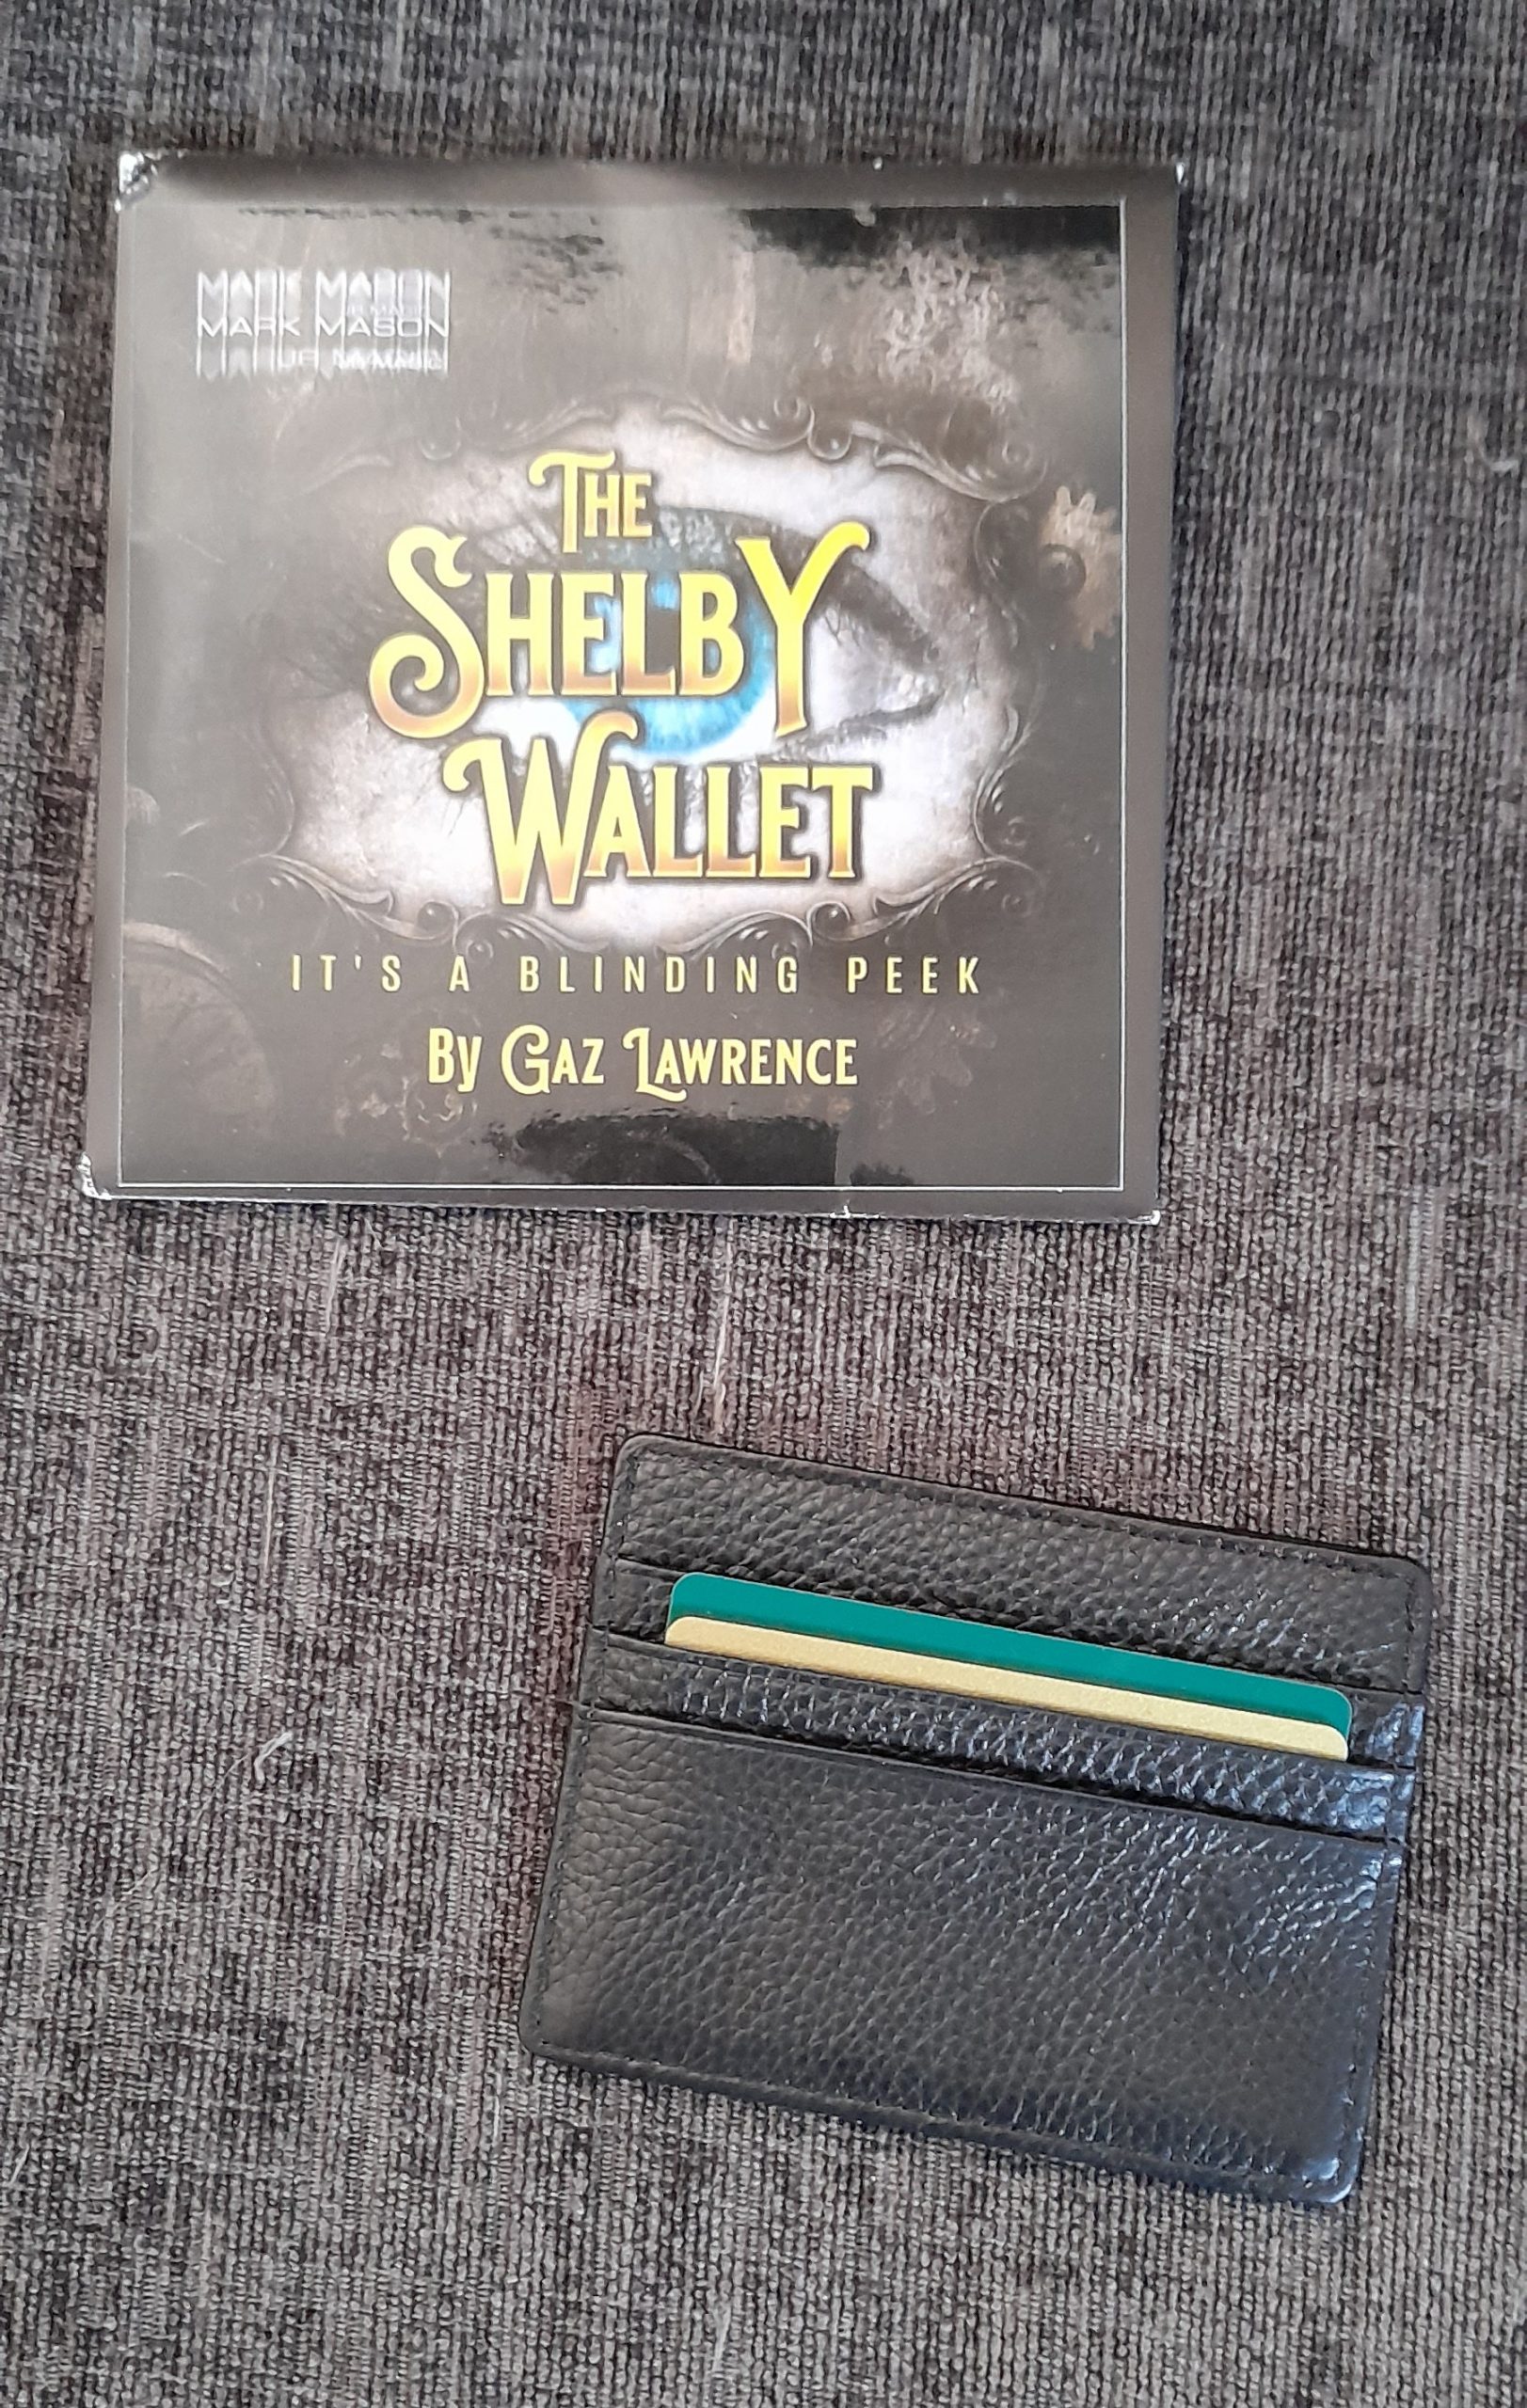 The Shelby Wallet by Gary Lawrence Black showing Back View and product packaging